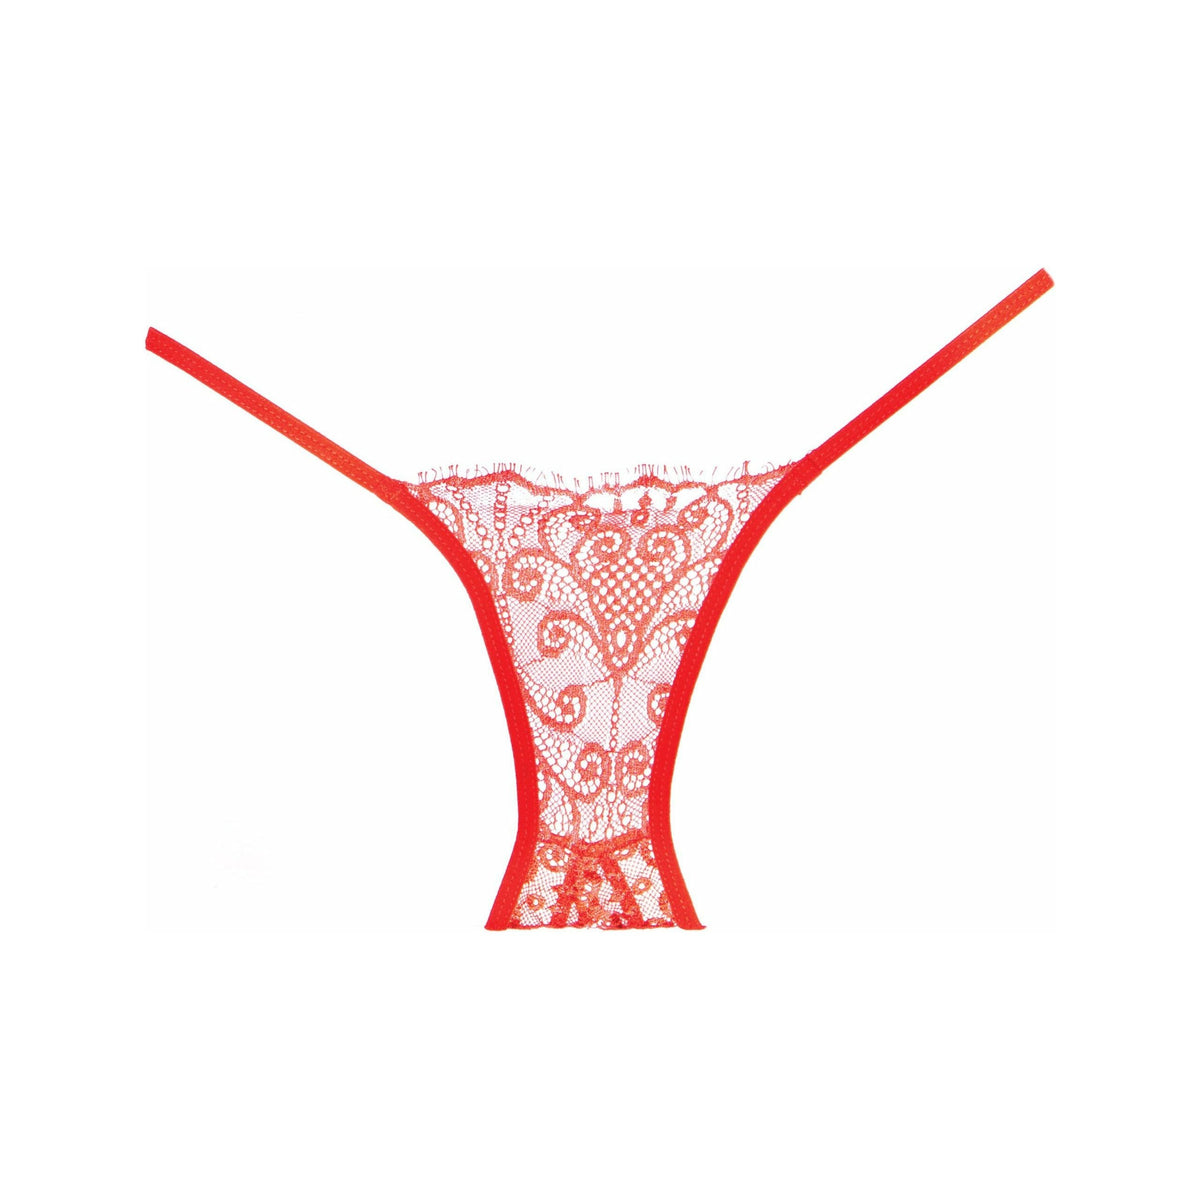 Allure Adore – Enchanted Belle Panty – One Size-Red